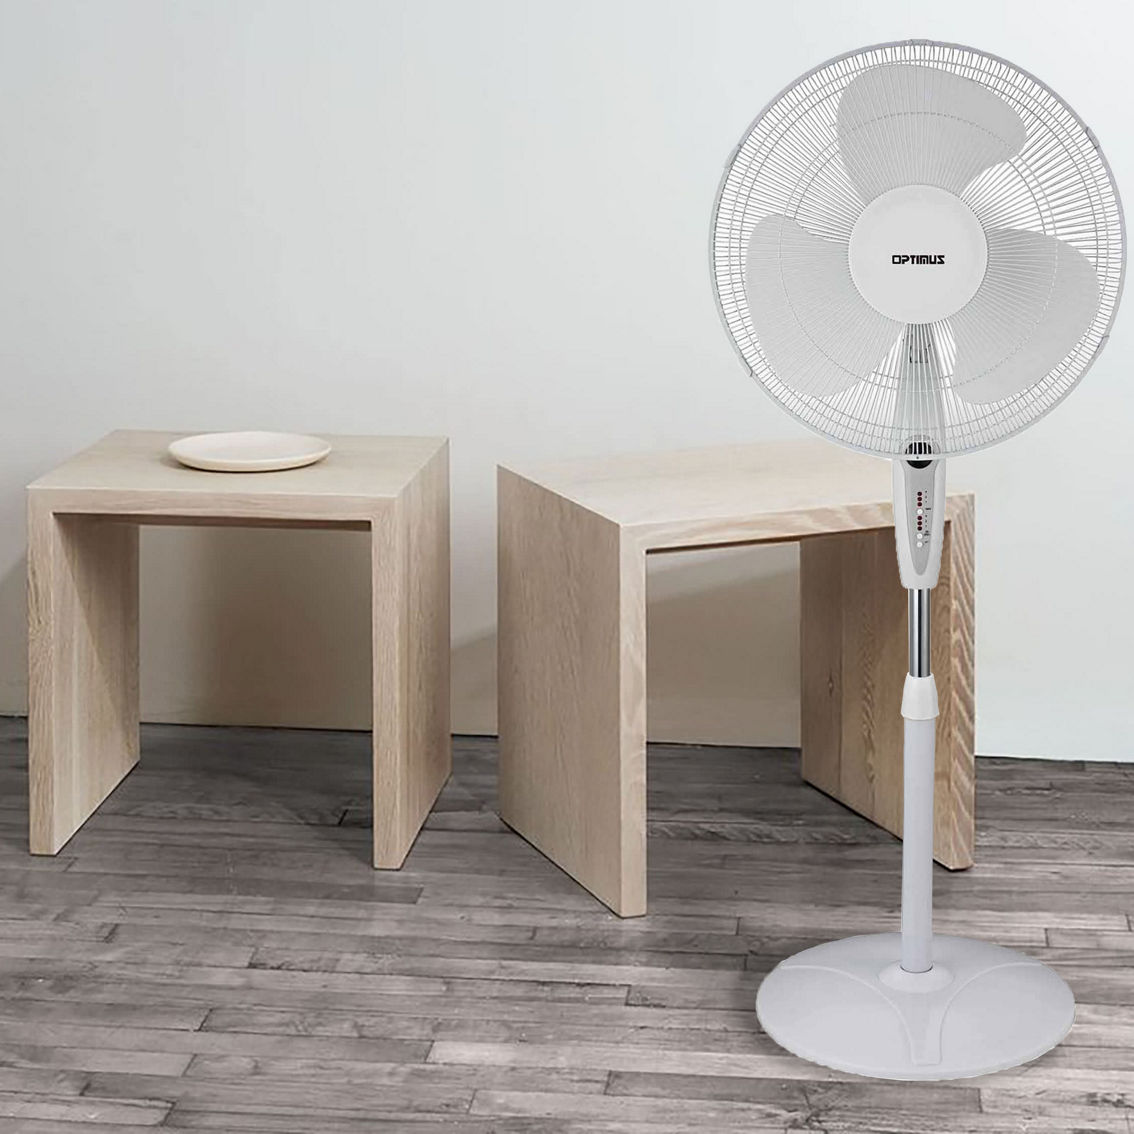 Optimus 16 in. Oscillating Stand Fan with Remote Control - Image 3 of 3